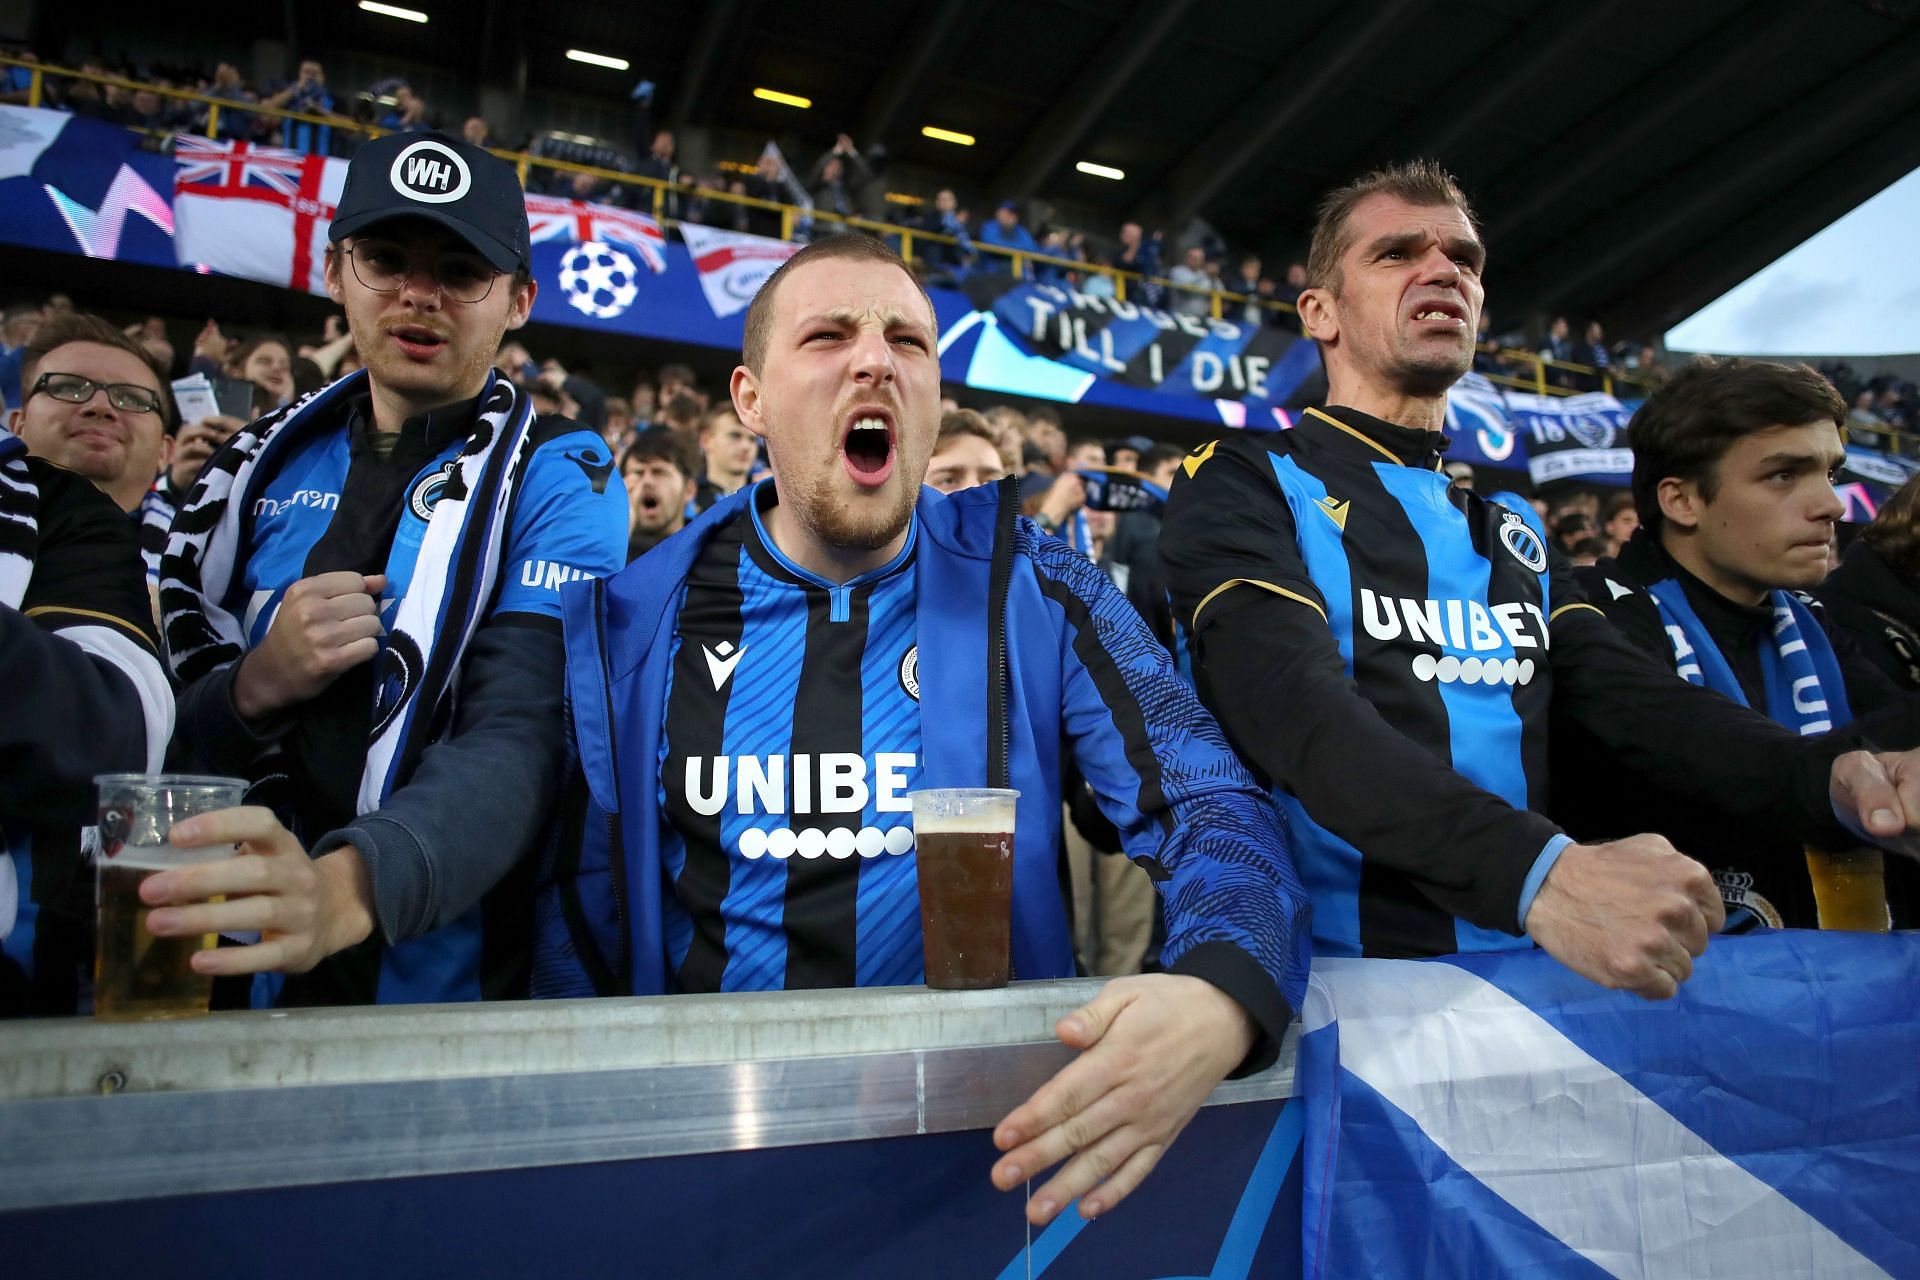 Club Brugge play host to Union Saint-Gilloise on Wednesday